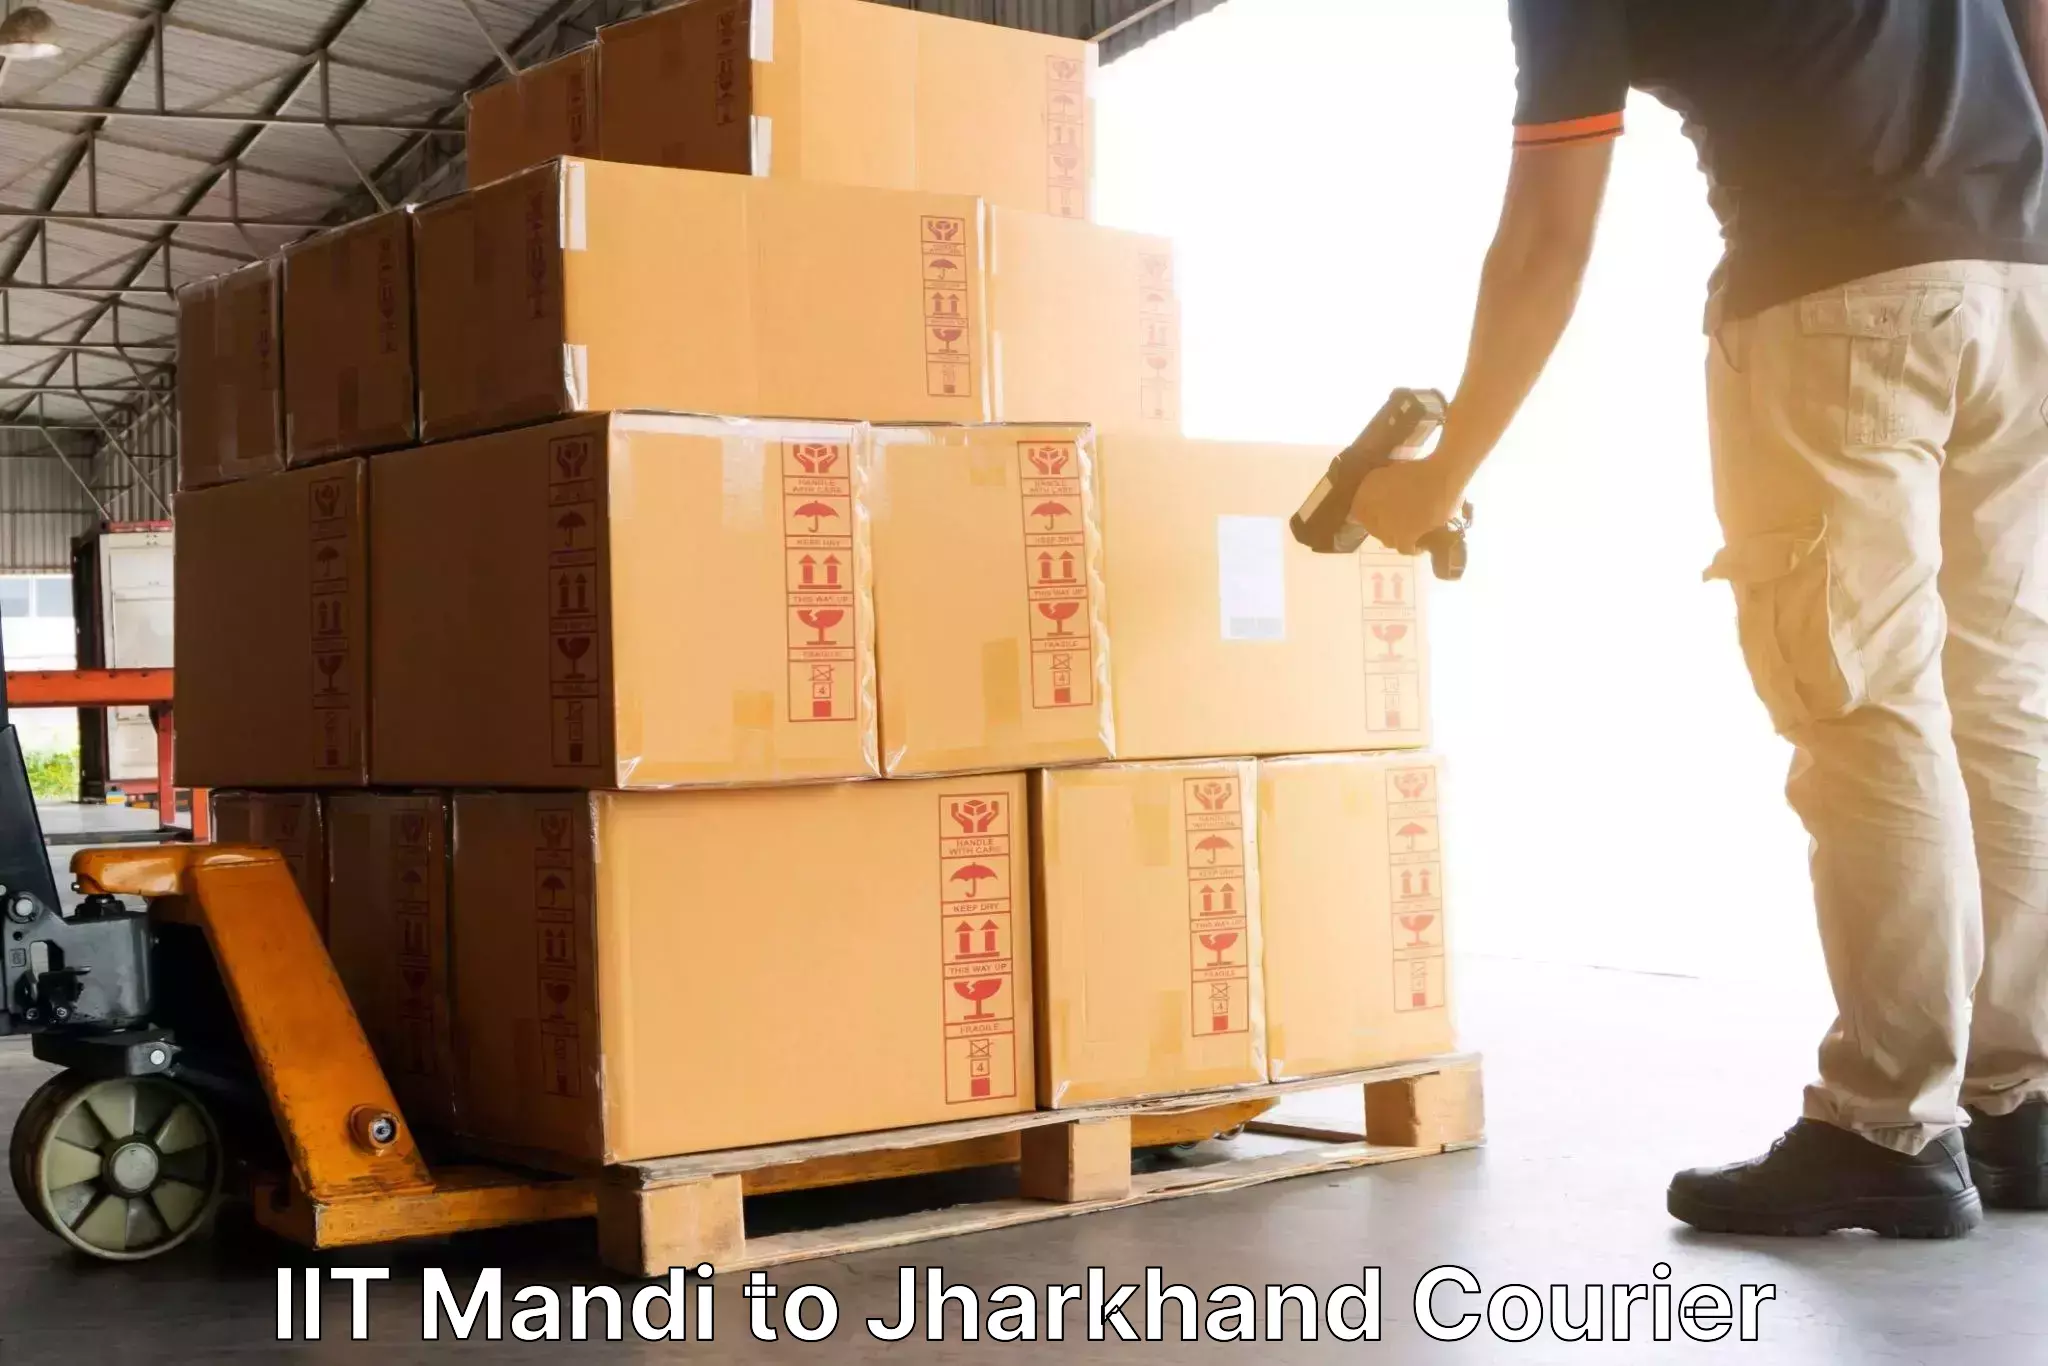 End-to-end delivery IIT Mandi to Isri